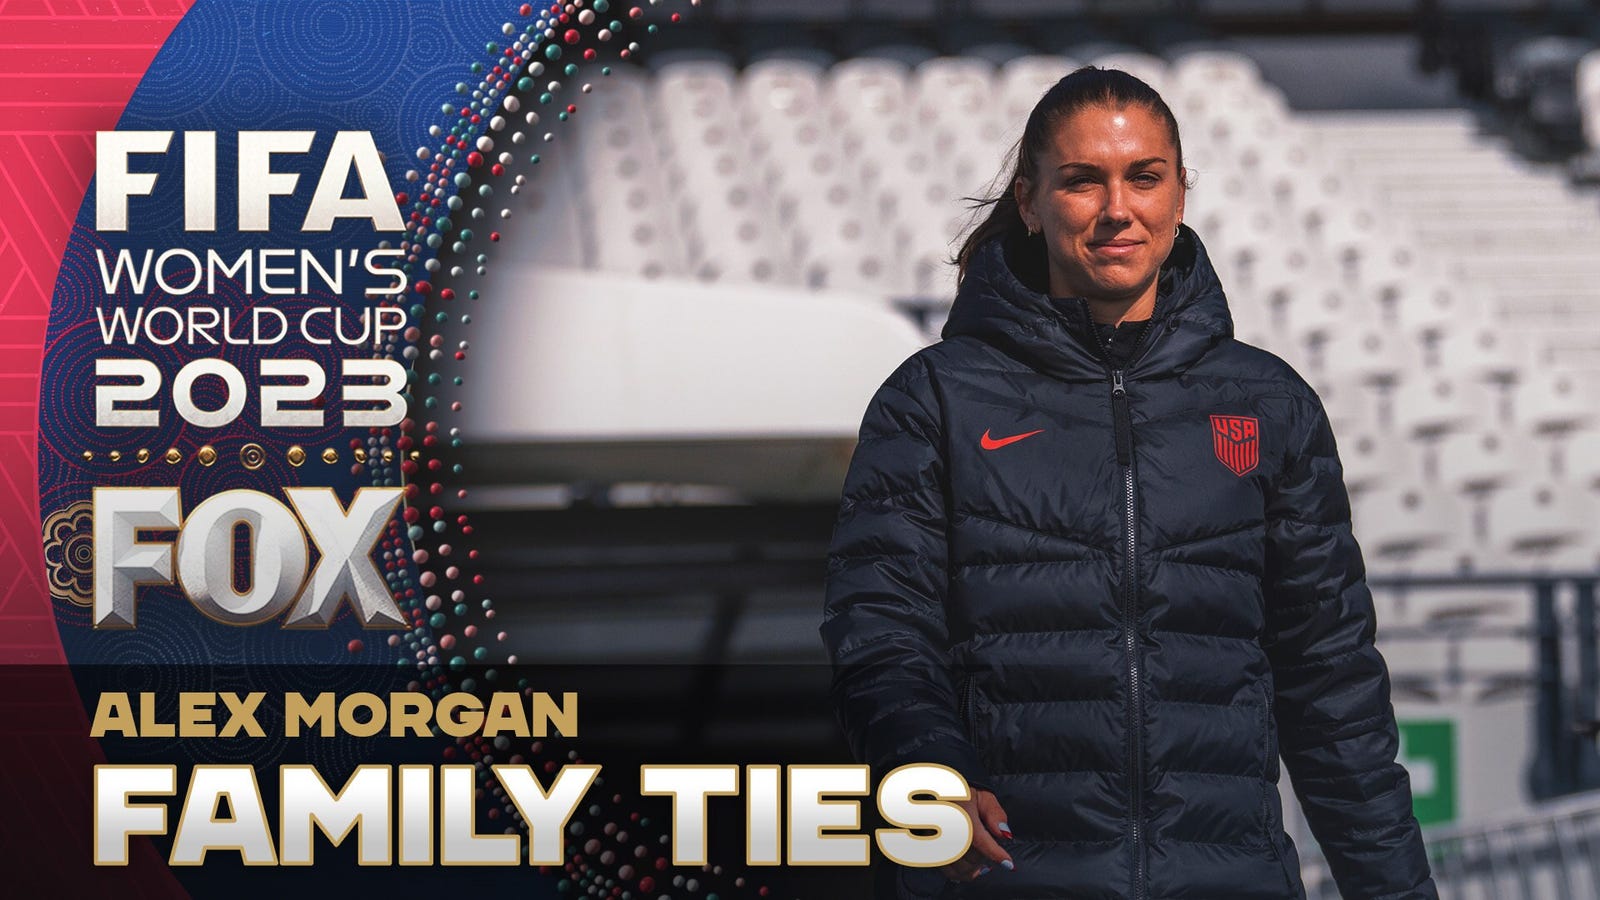 'He's just the ultimate soccer dad' - Alex Morgan on father Mike